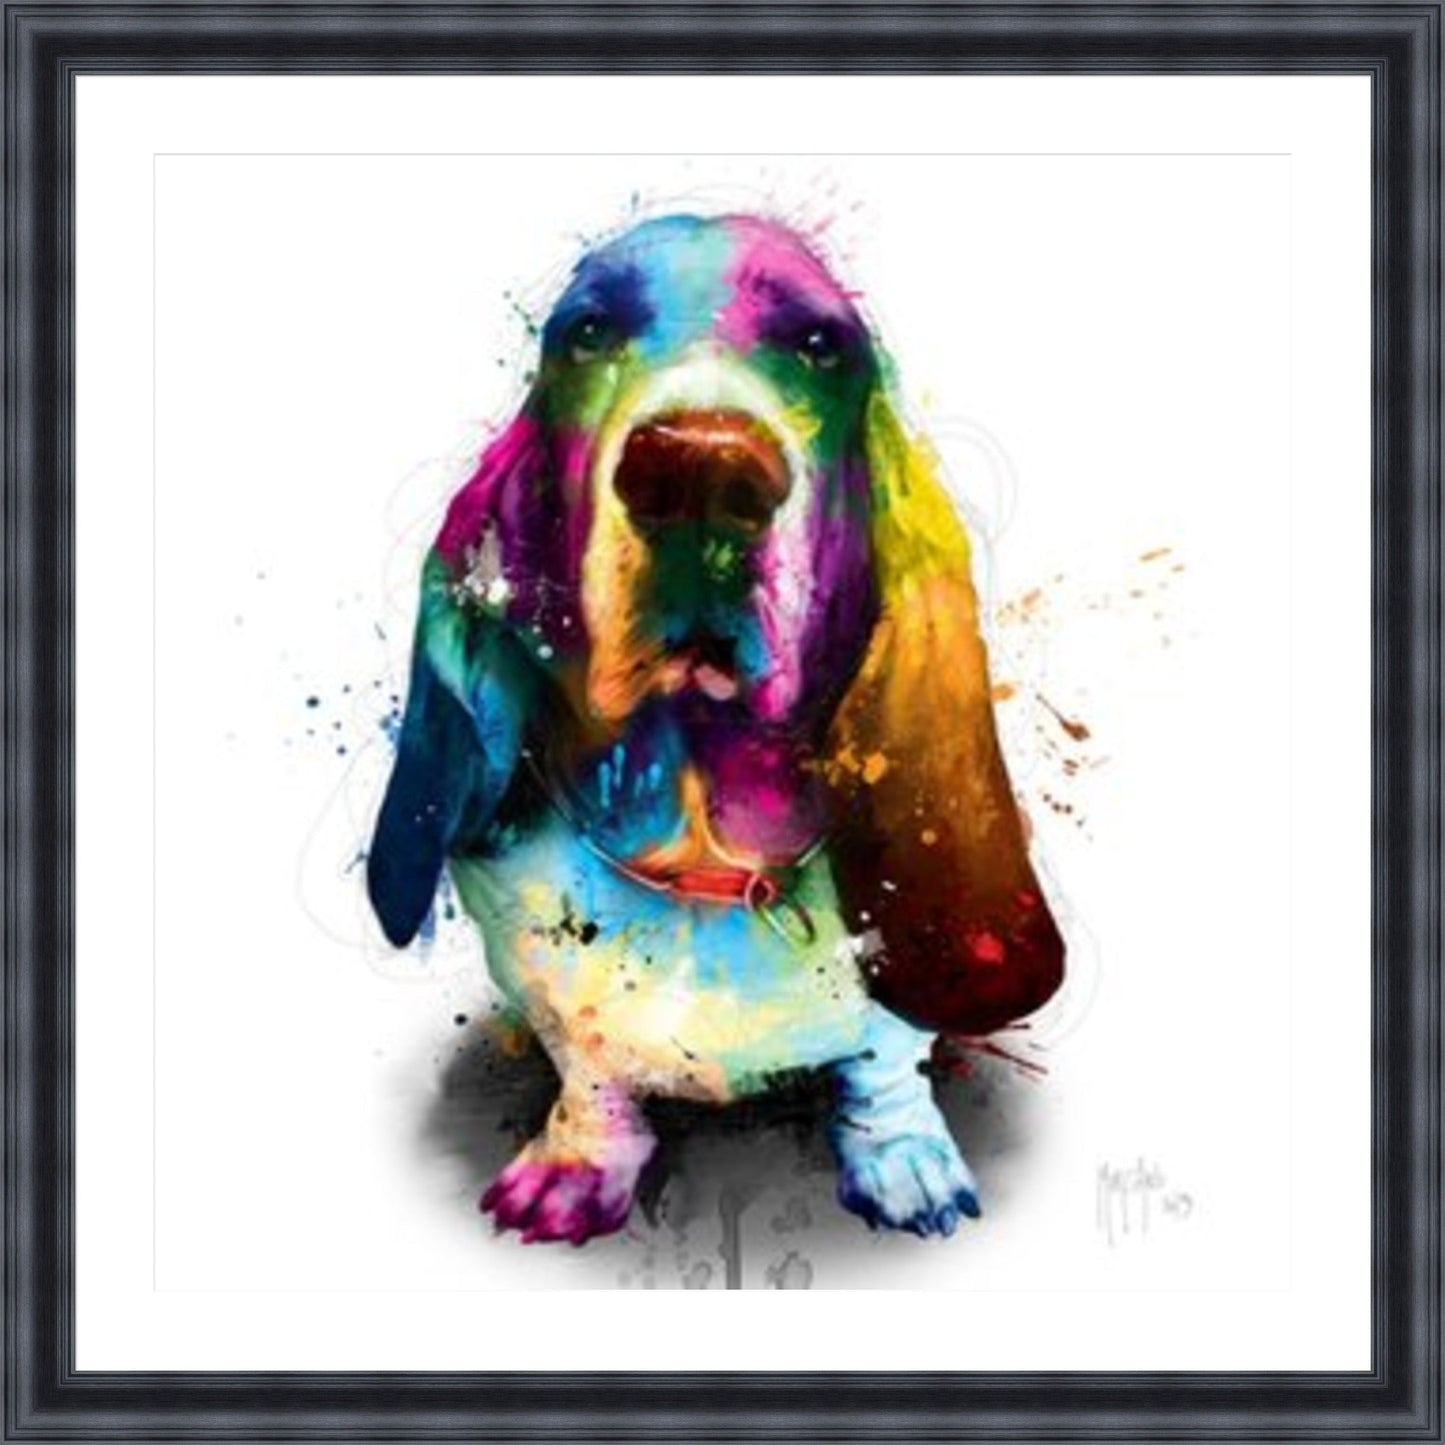 Diesel by Patrice Murciano